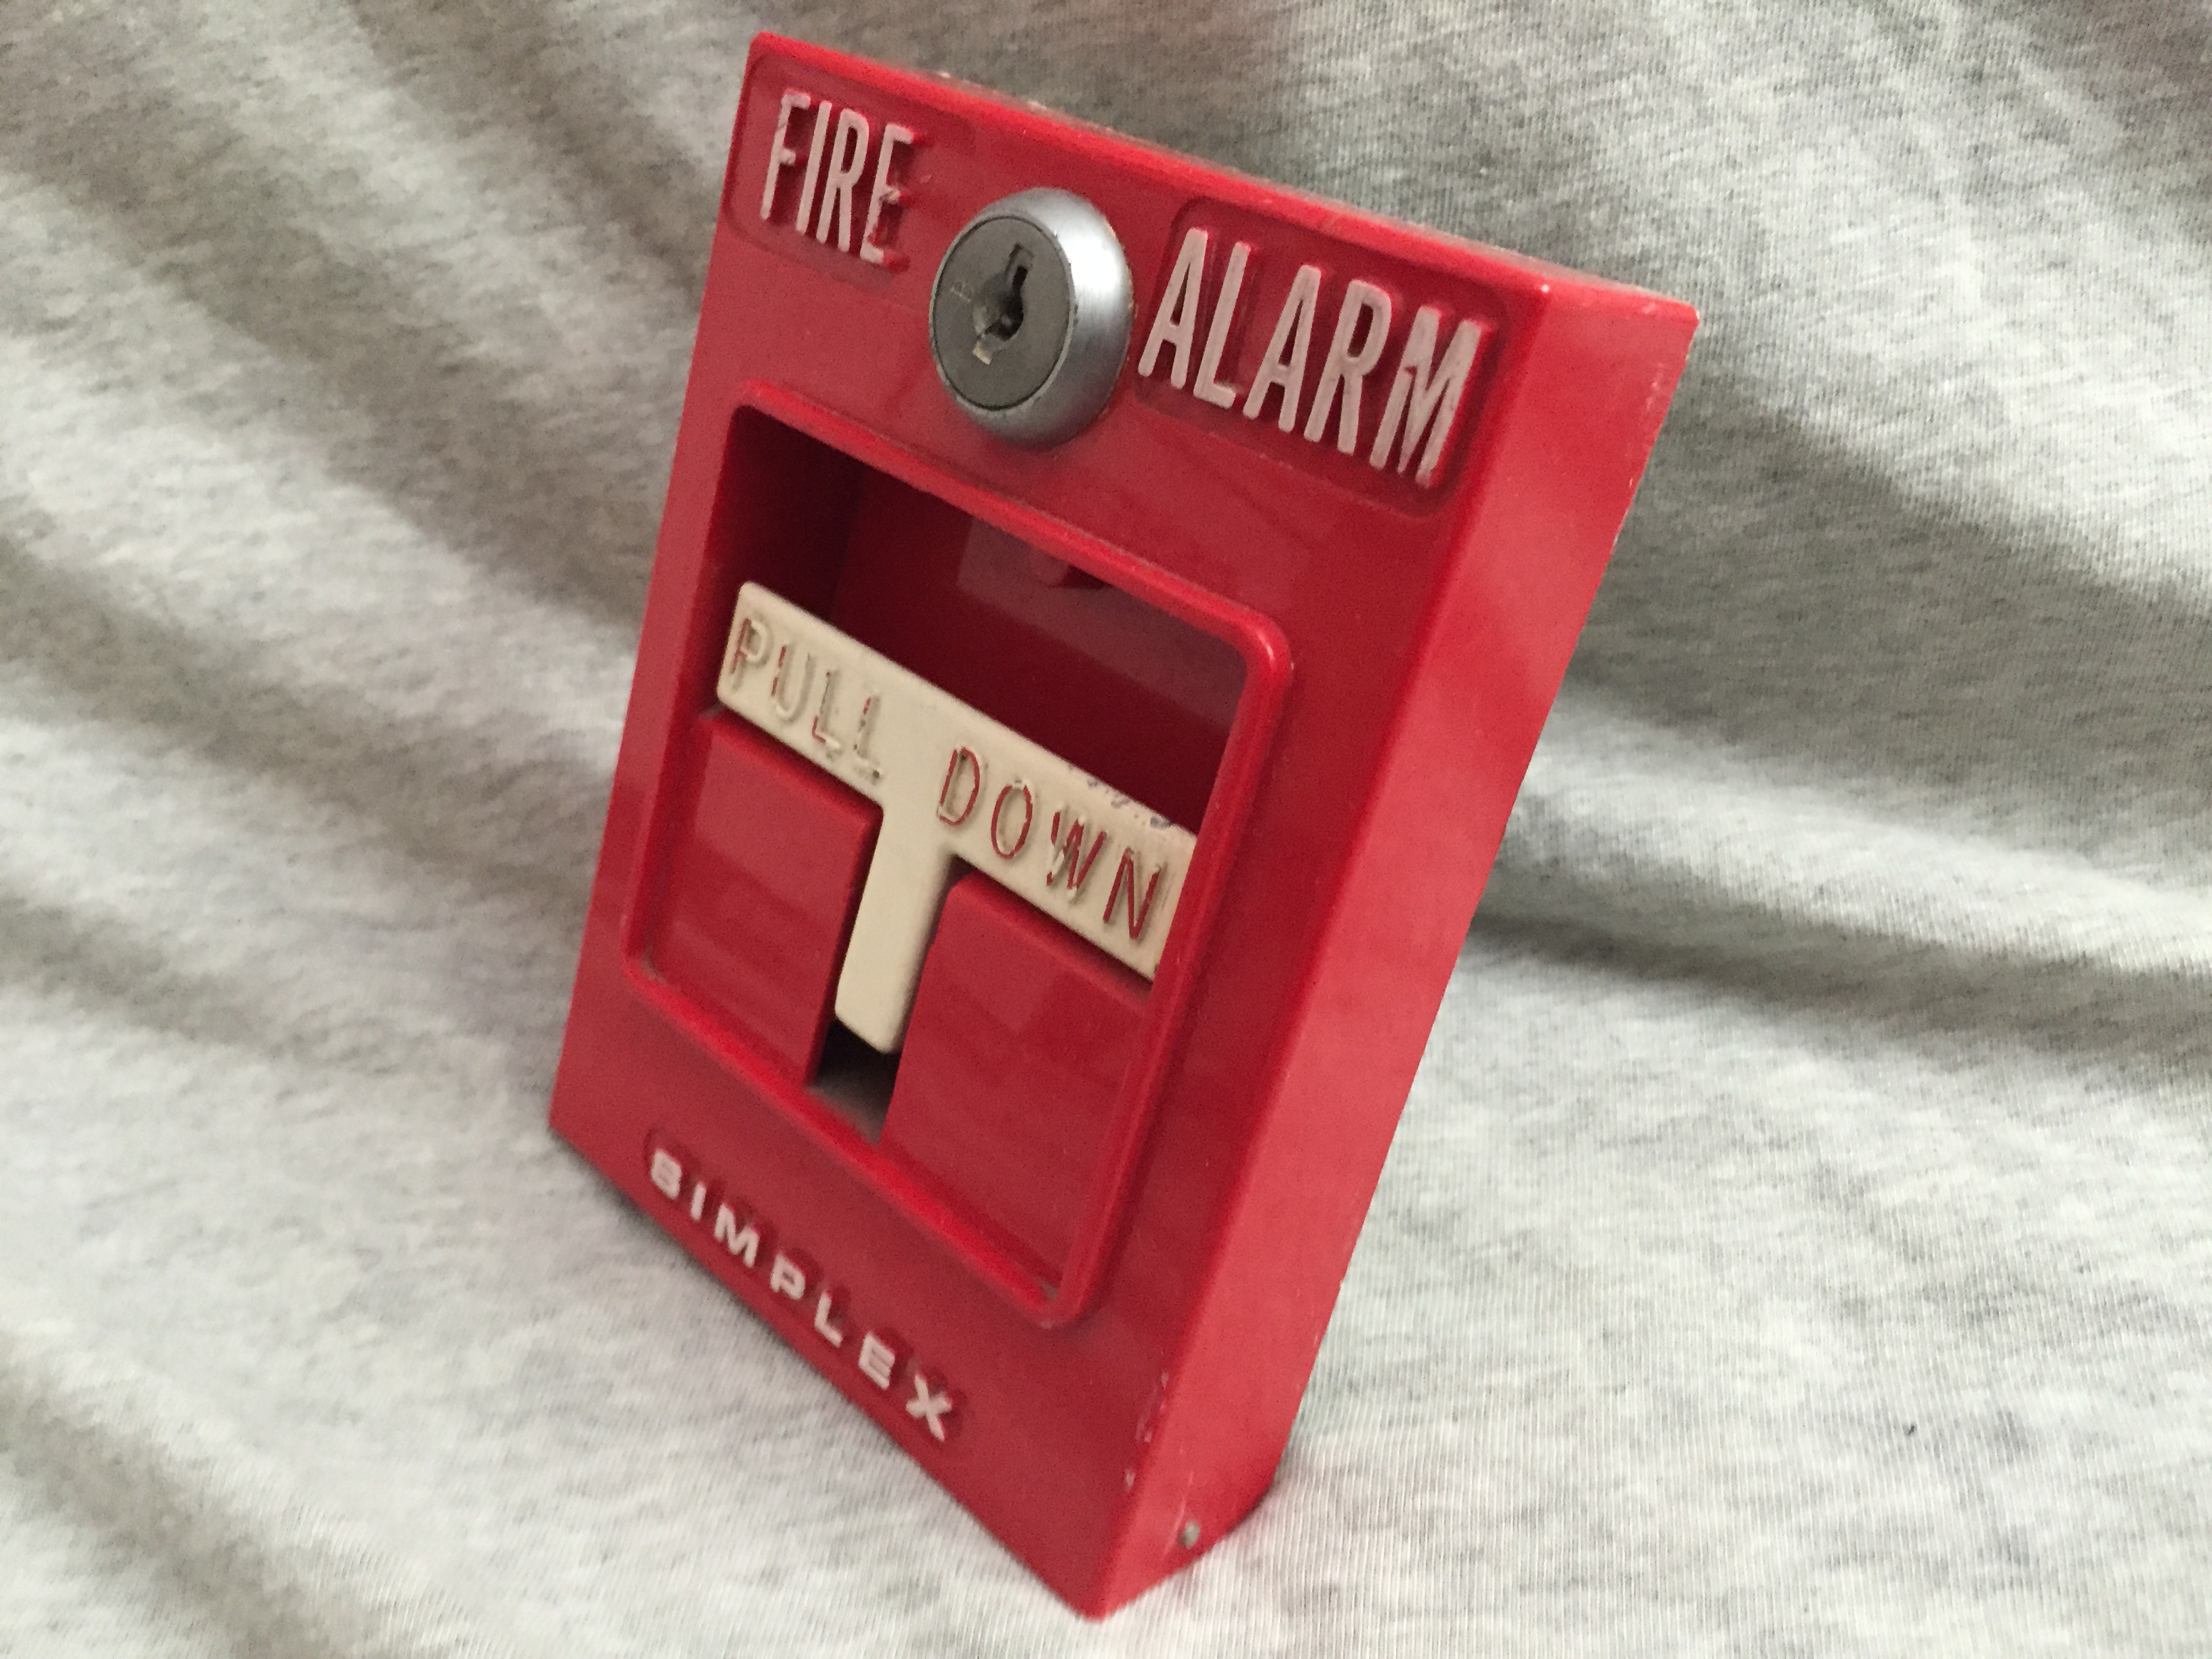 Simplex 4251-20 - Fire Alarm Collection, Information, Pictures, and ...